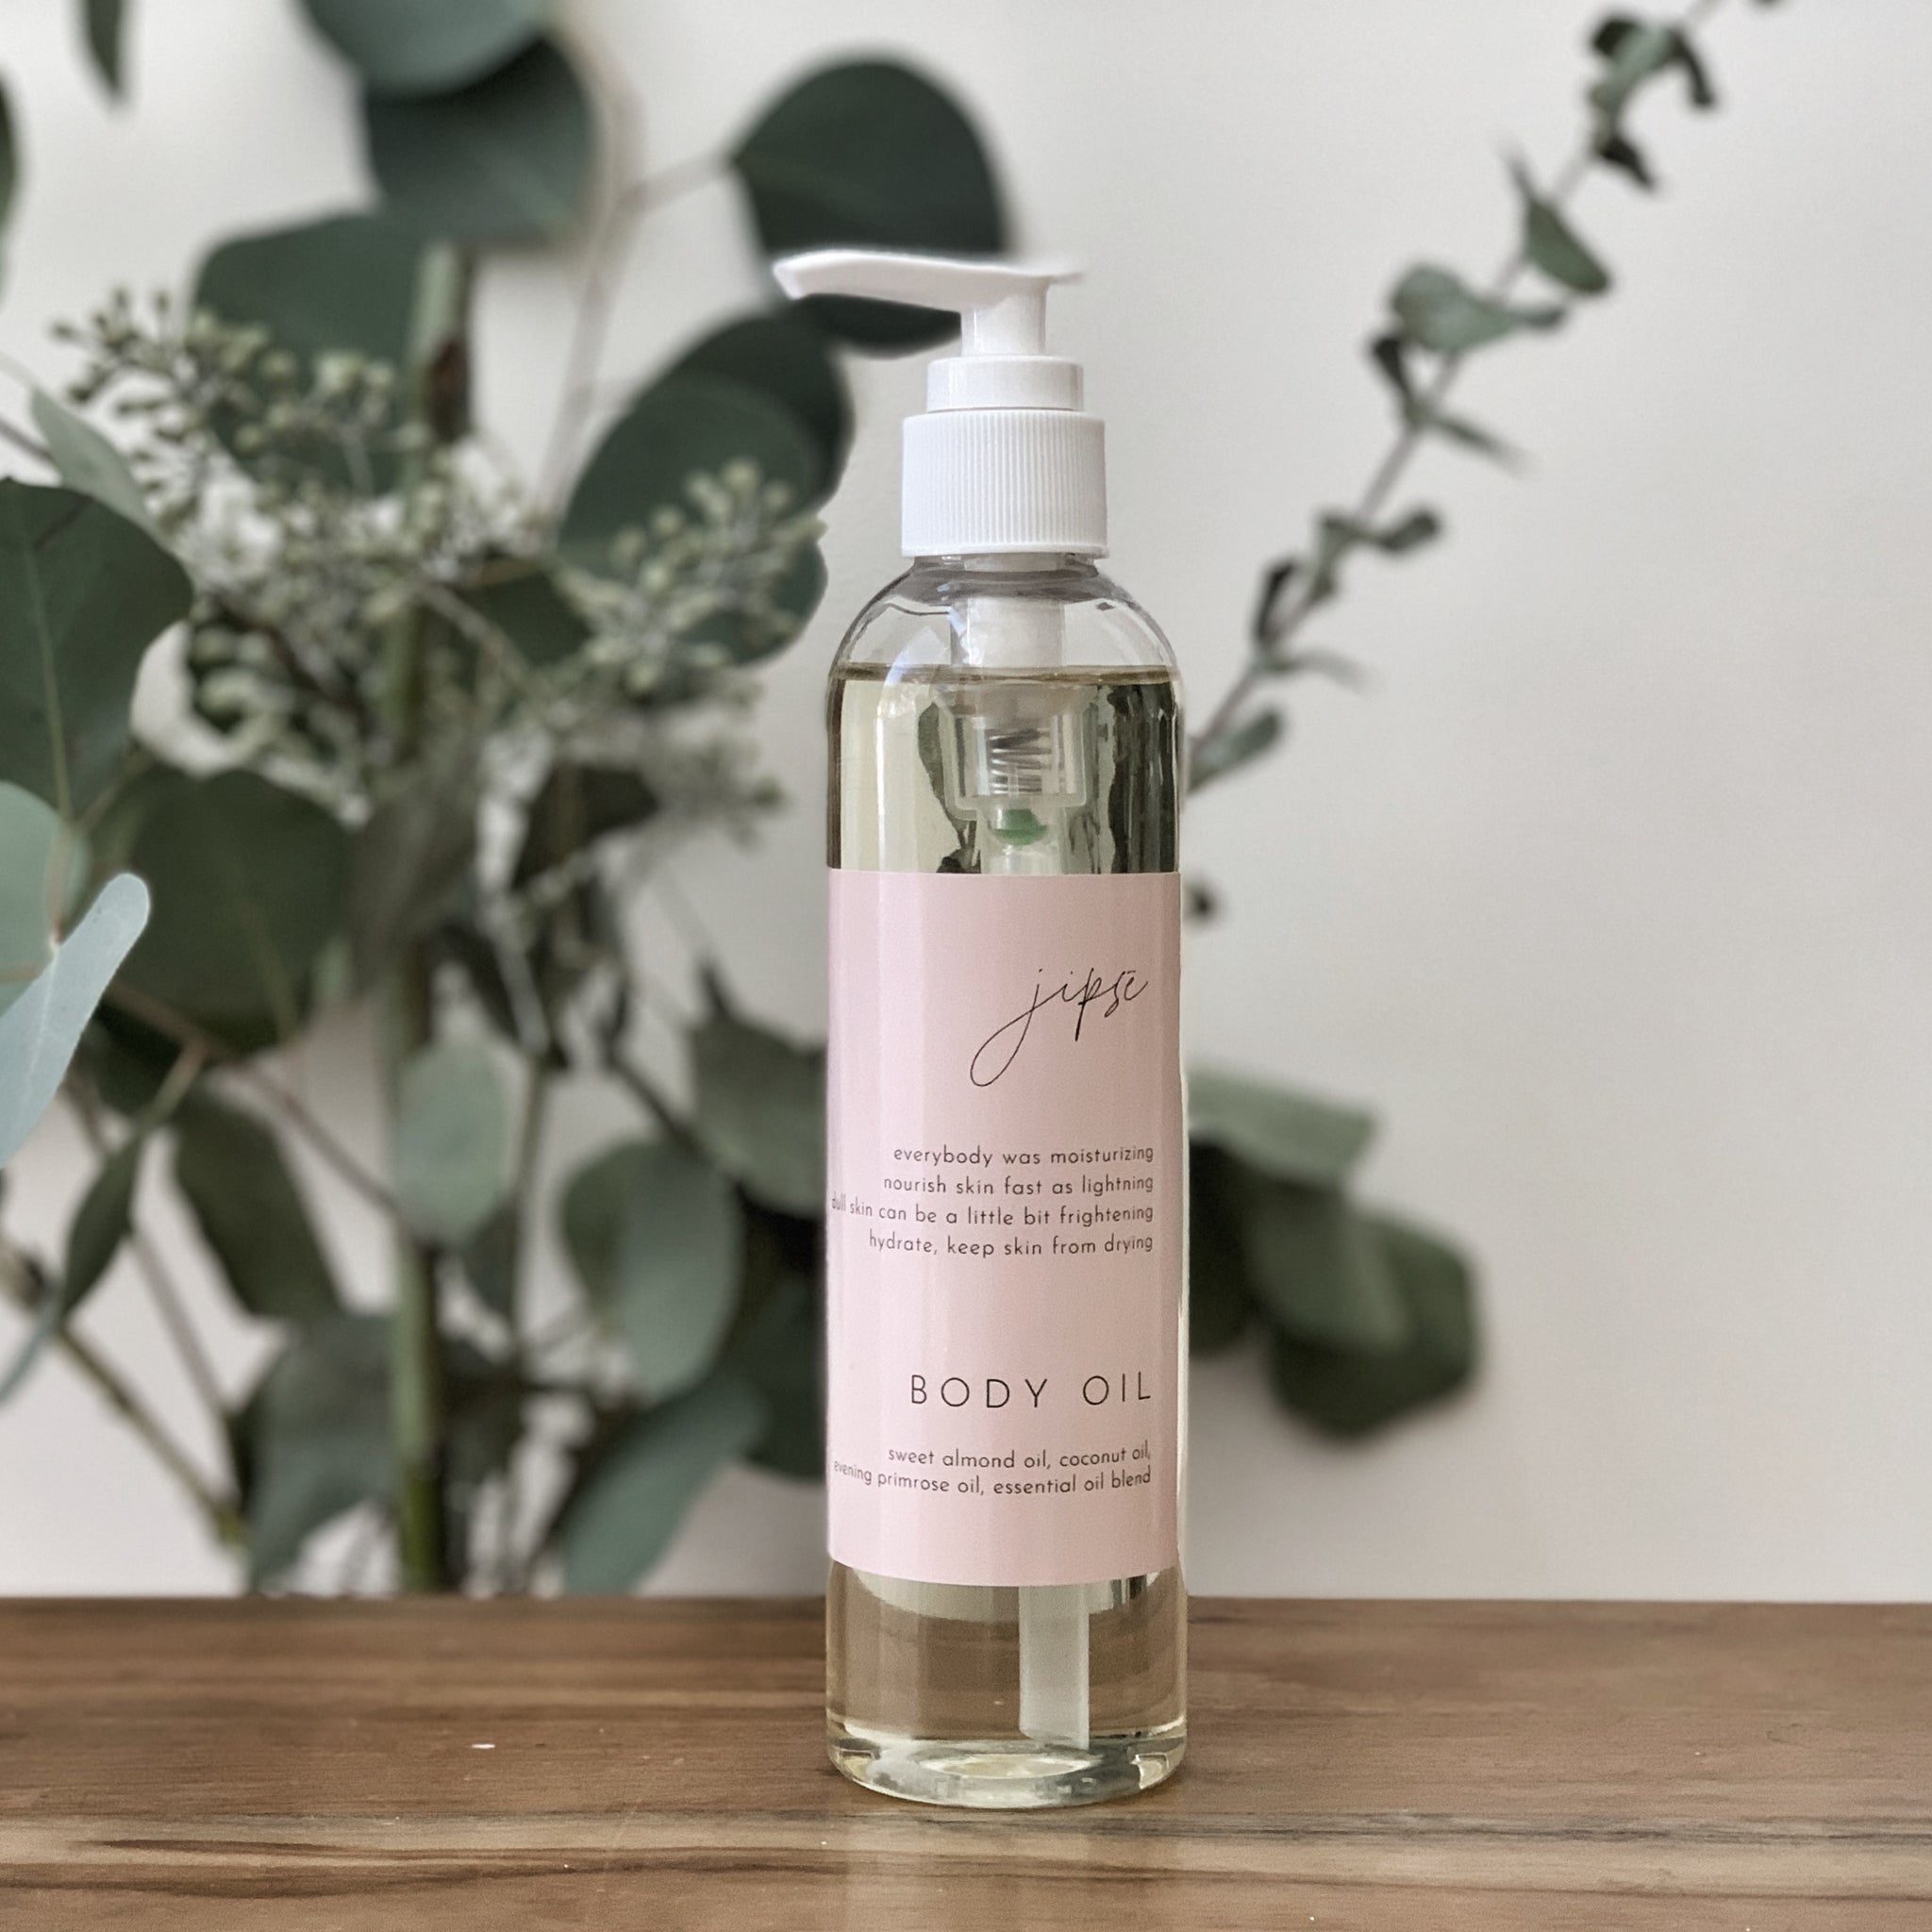 SCENTED MOITURIZING BODY OIL – jipsē candles